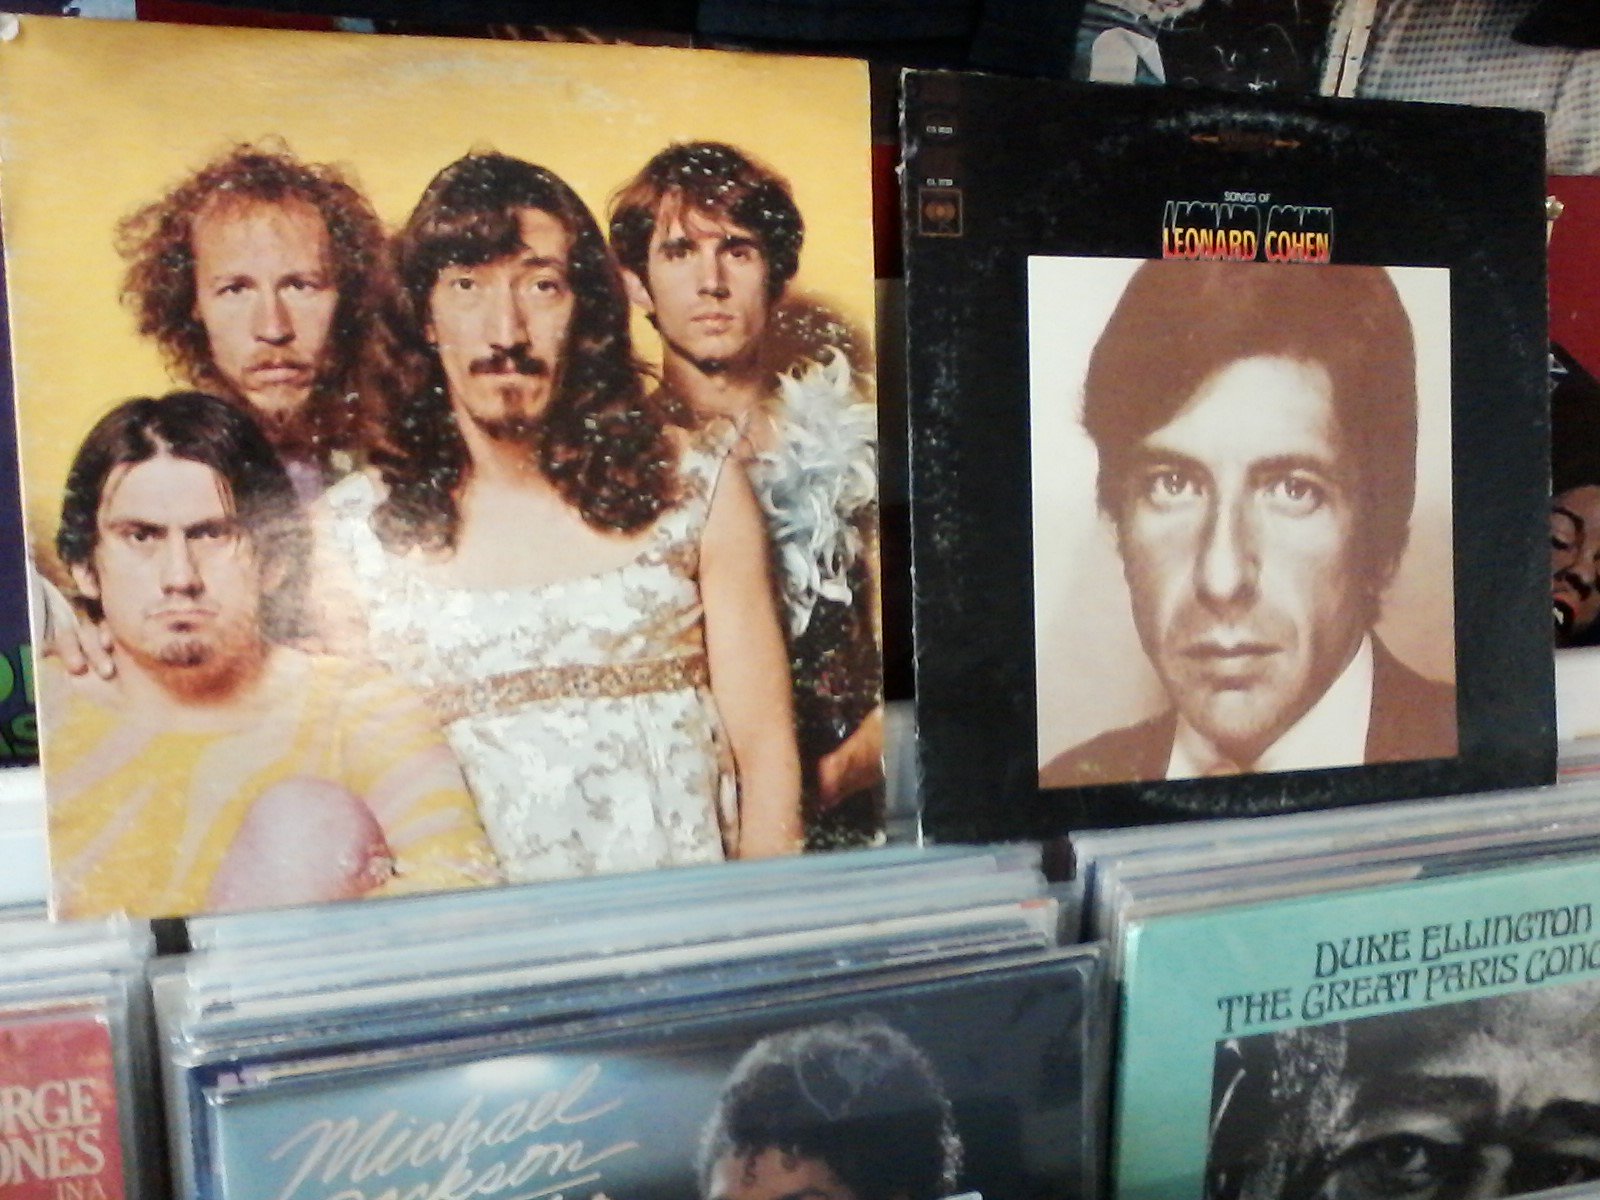 Happy Birthday to Don Preston of the Mothers of Invention & the late Leonard Cohen 